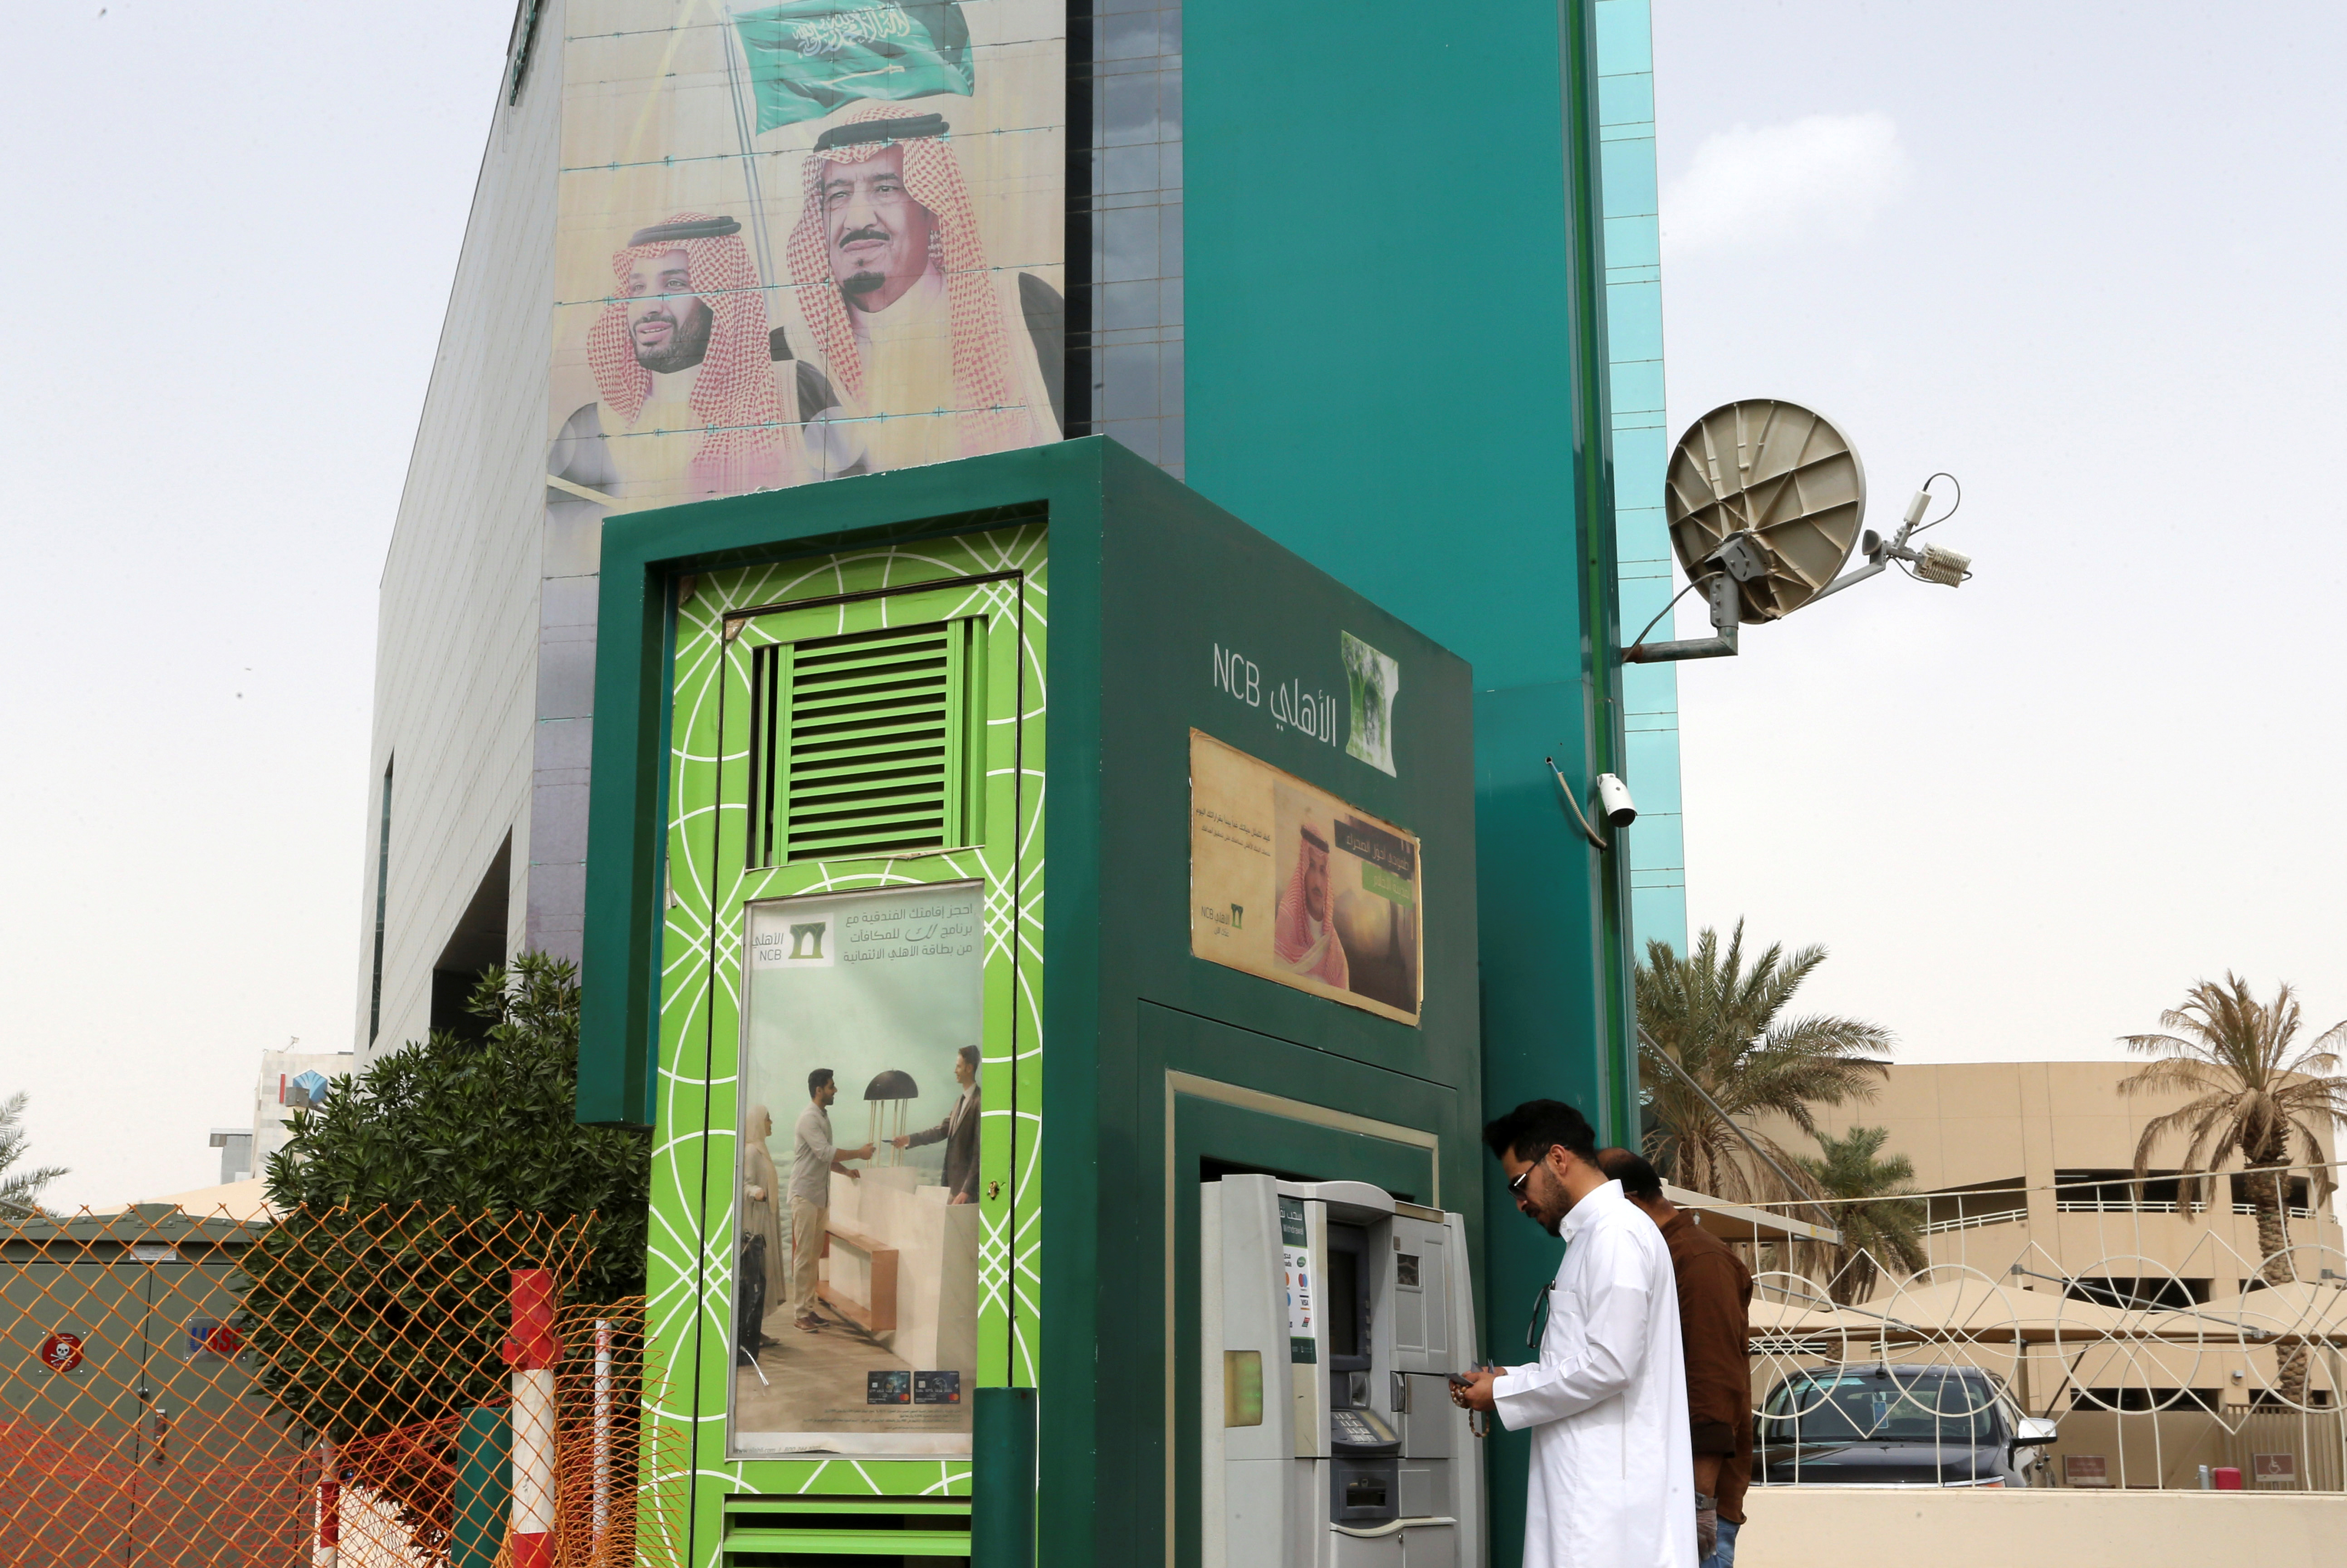 A man withdraws money from an ATM outside the Saudi NCB bank, after an outbreak of coronavirus, in Riyadh